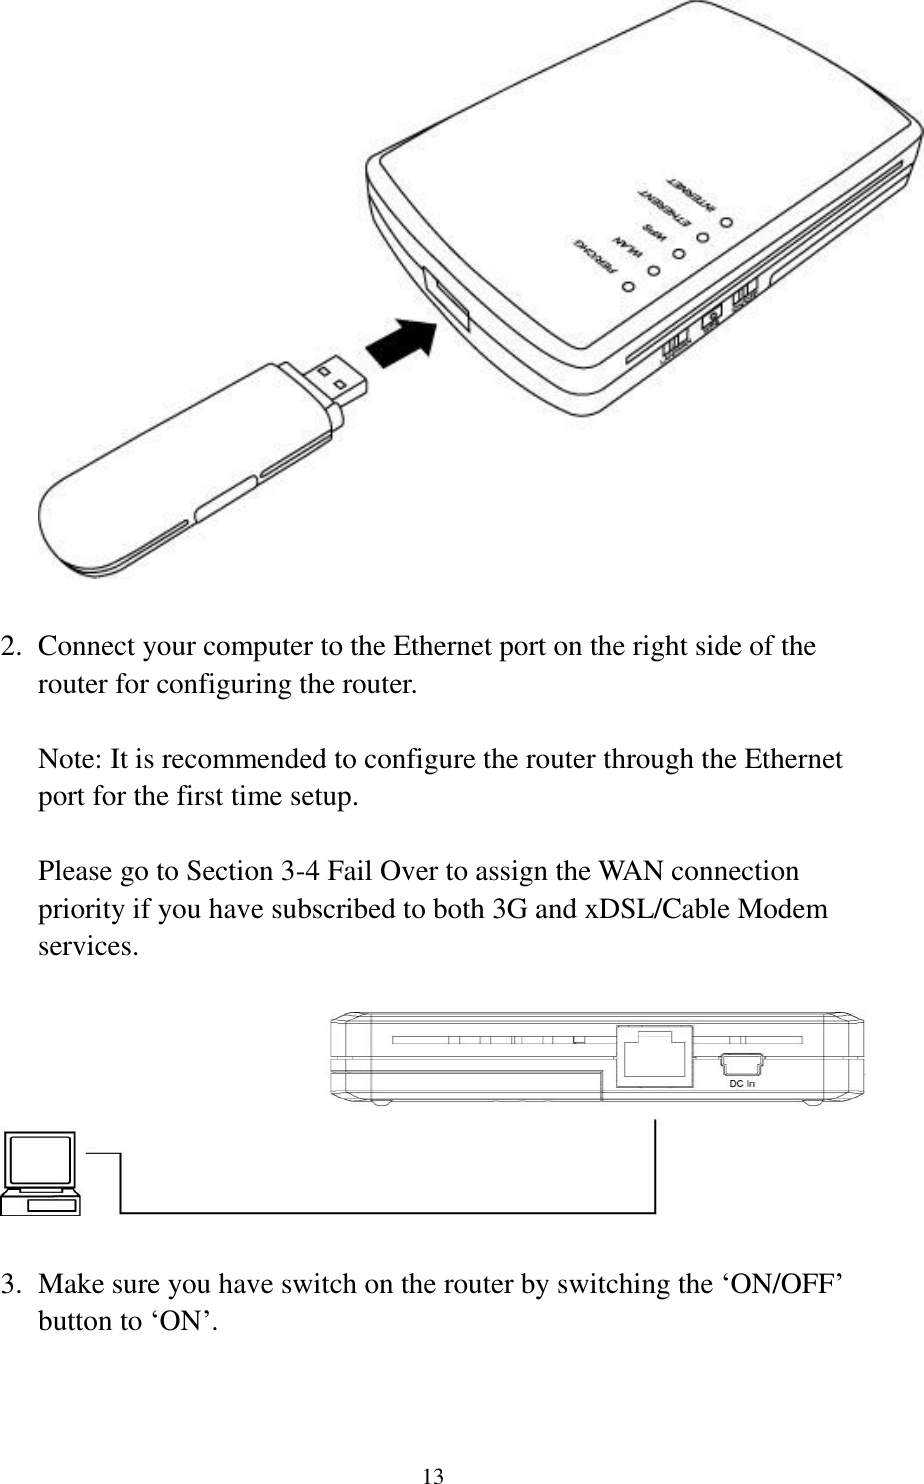 13   2. Connect your computer to the Ethernet port on the right side of the router for configuring the router.  Note: It is recommended to configure the router through the Ethernet port for the first time setup.  Please go to Section 3-4 Fail Over to assign the WAN connection priority if you have subscribed to both 3G and xDSL/Cable Modem services.    3. Make sure you have switch on the router by switching the „ON/OFF‟ button to „ON‟.  